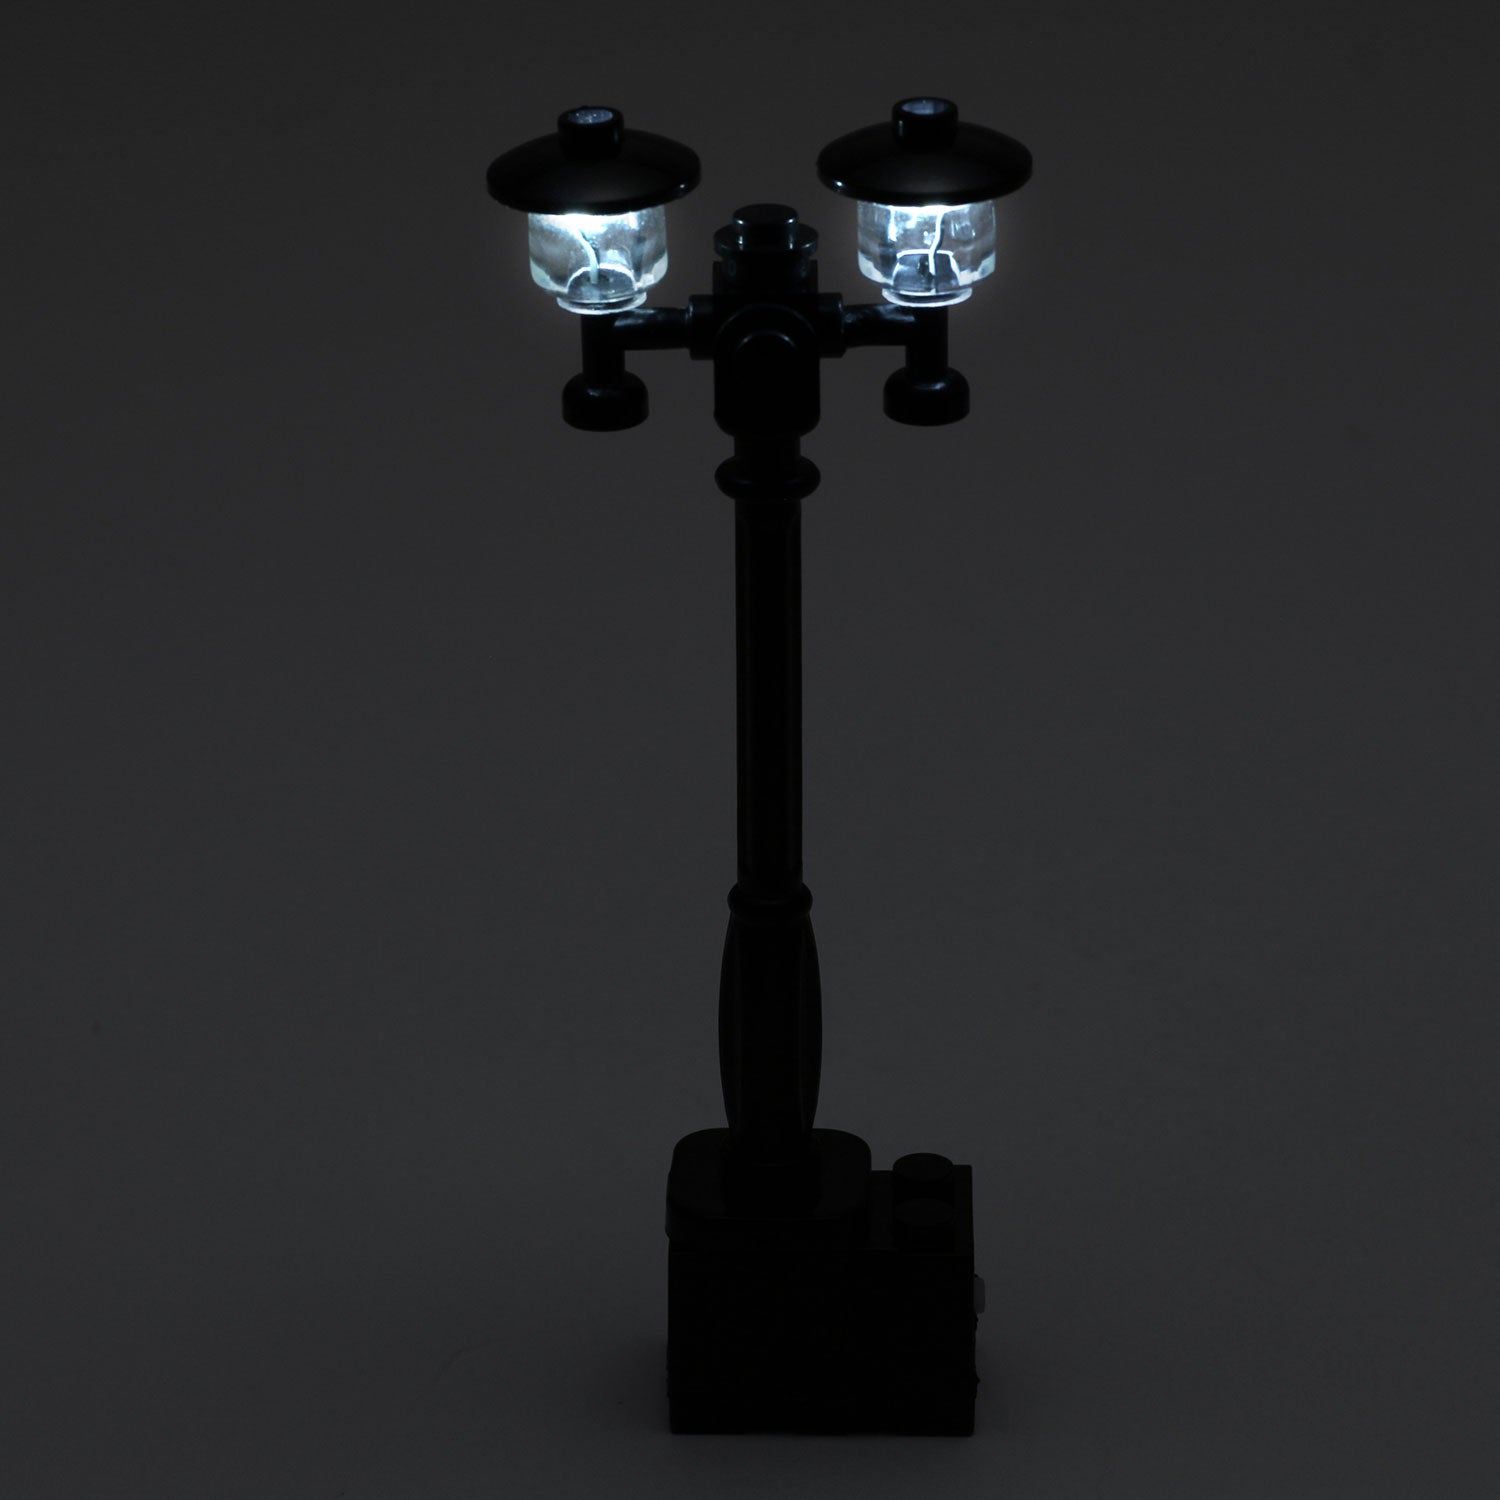 Black Double Light-Up Minifig Scale Lamp Post (Cold/White Light) - LEGO Compatible